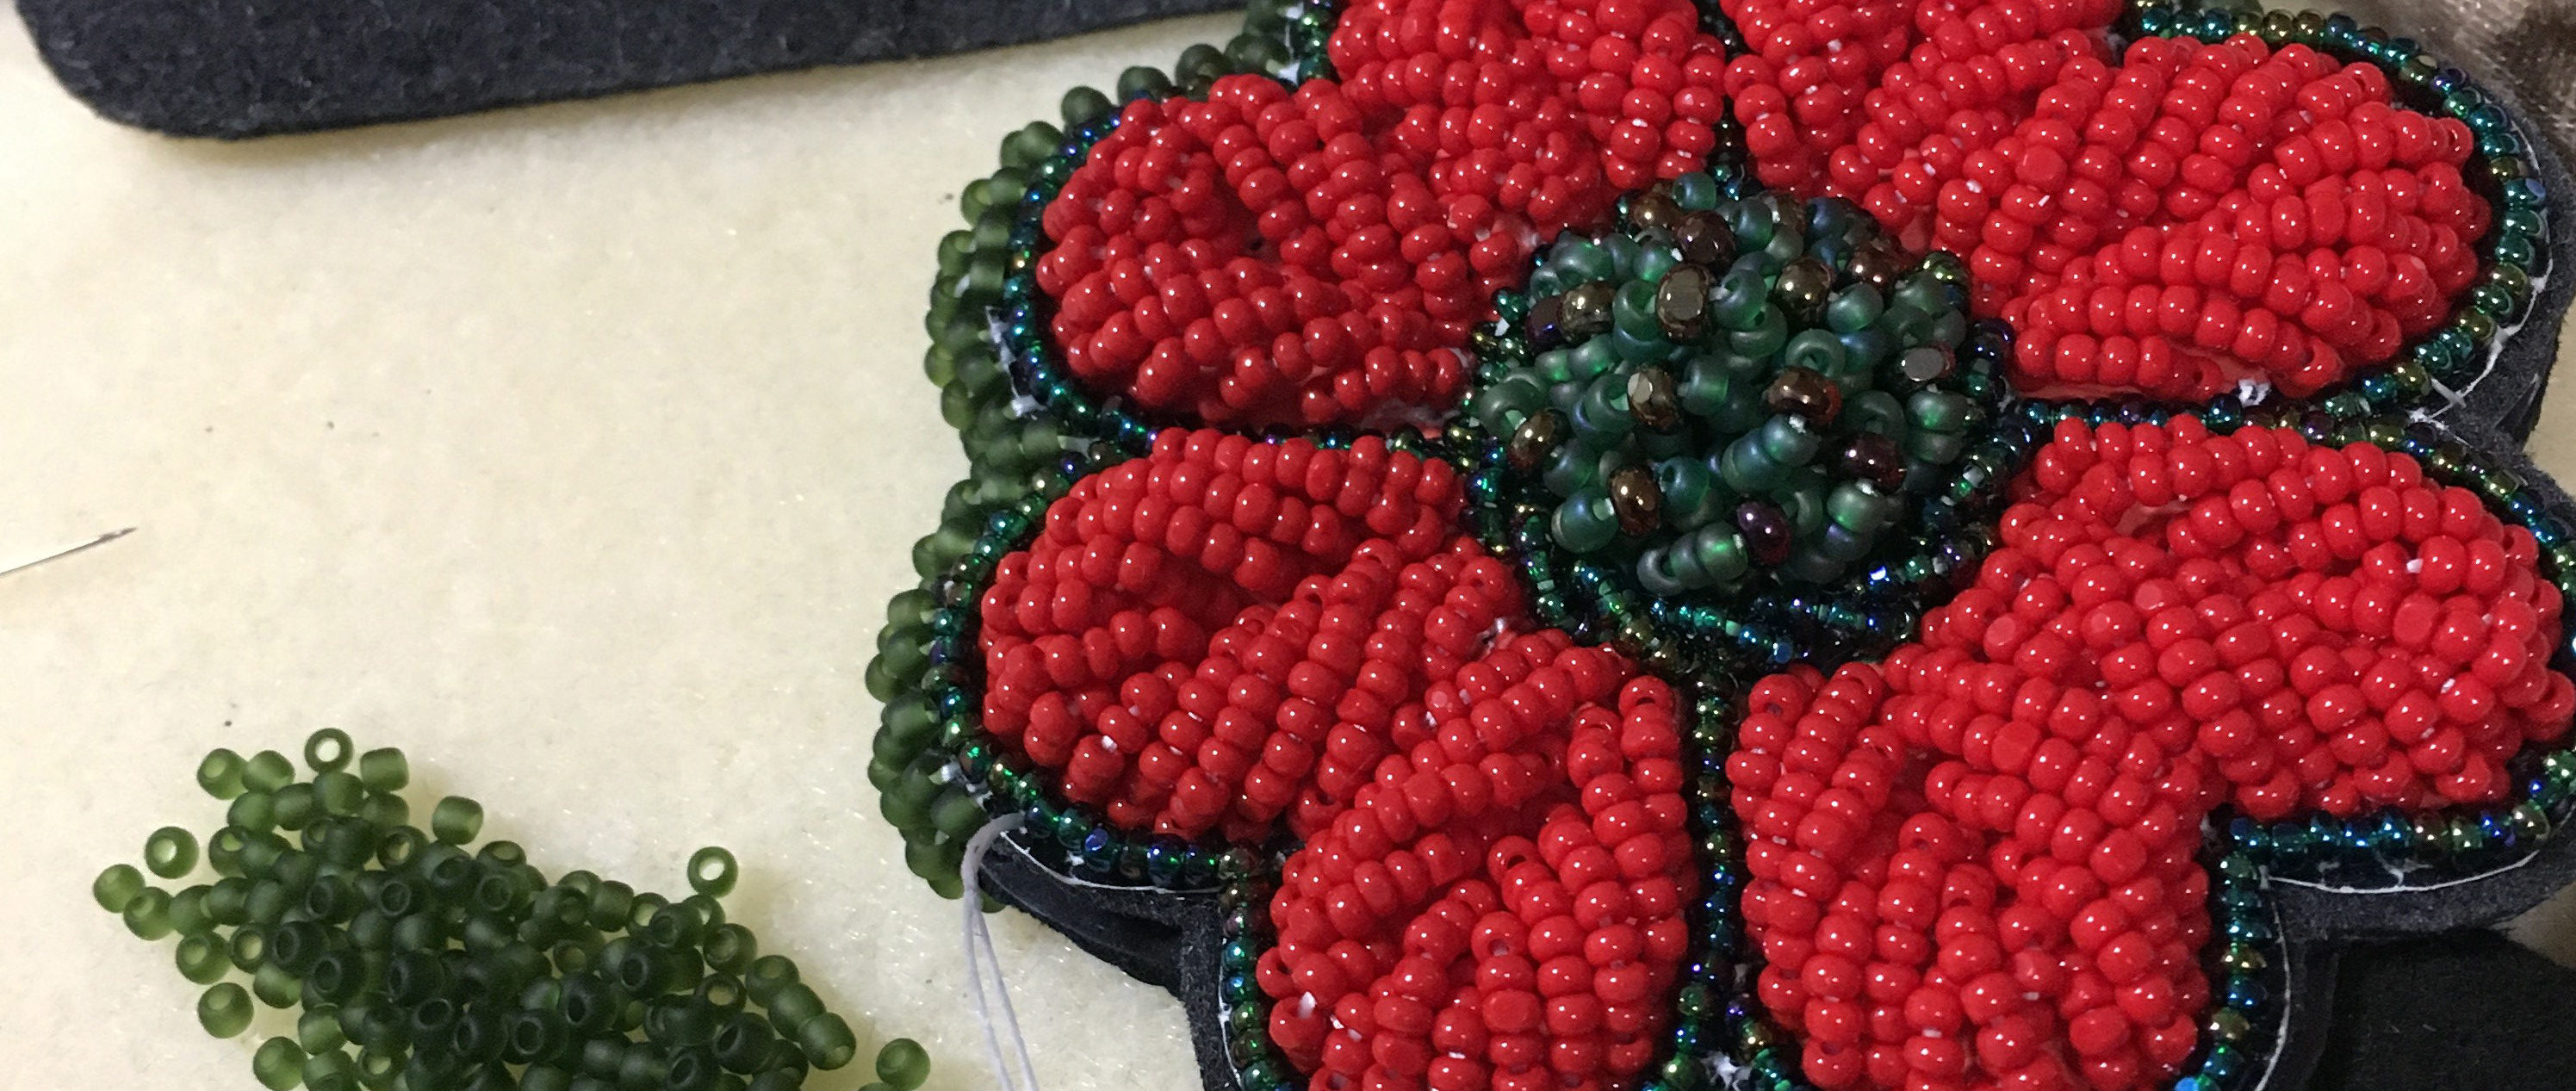 Red and green beaded poppy made by First Nations artist Naomi Smith.